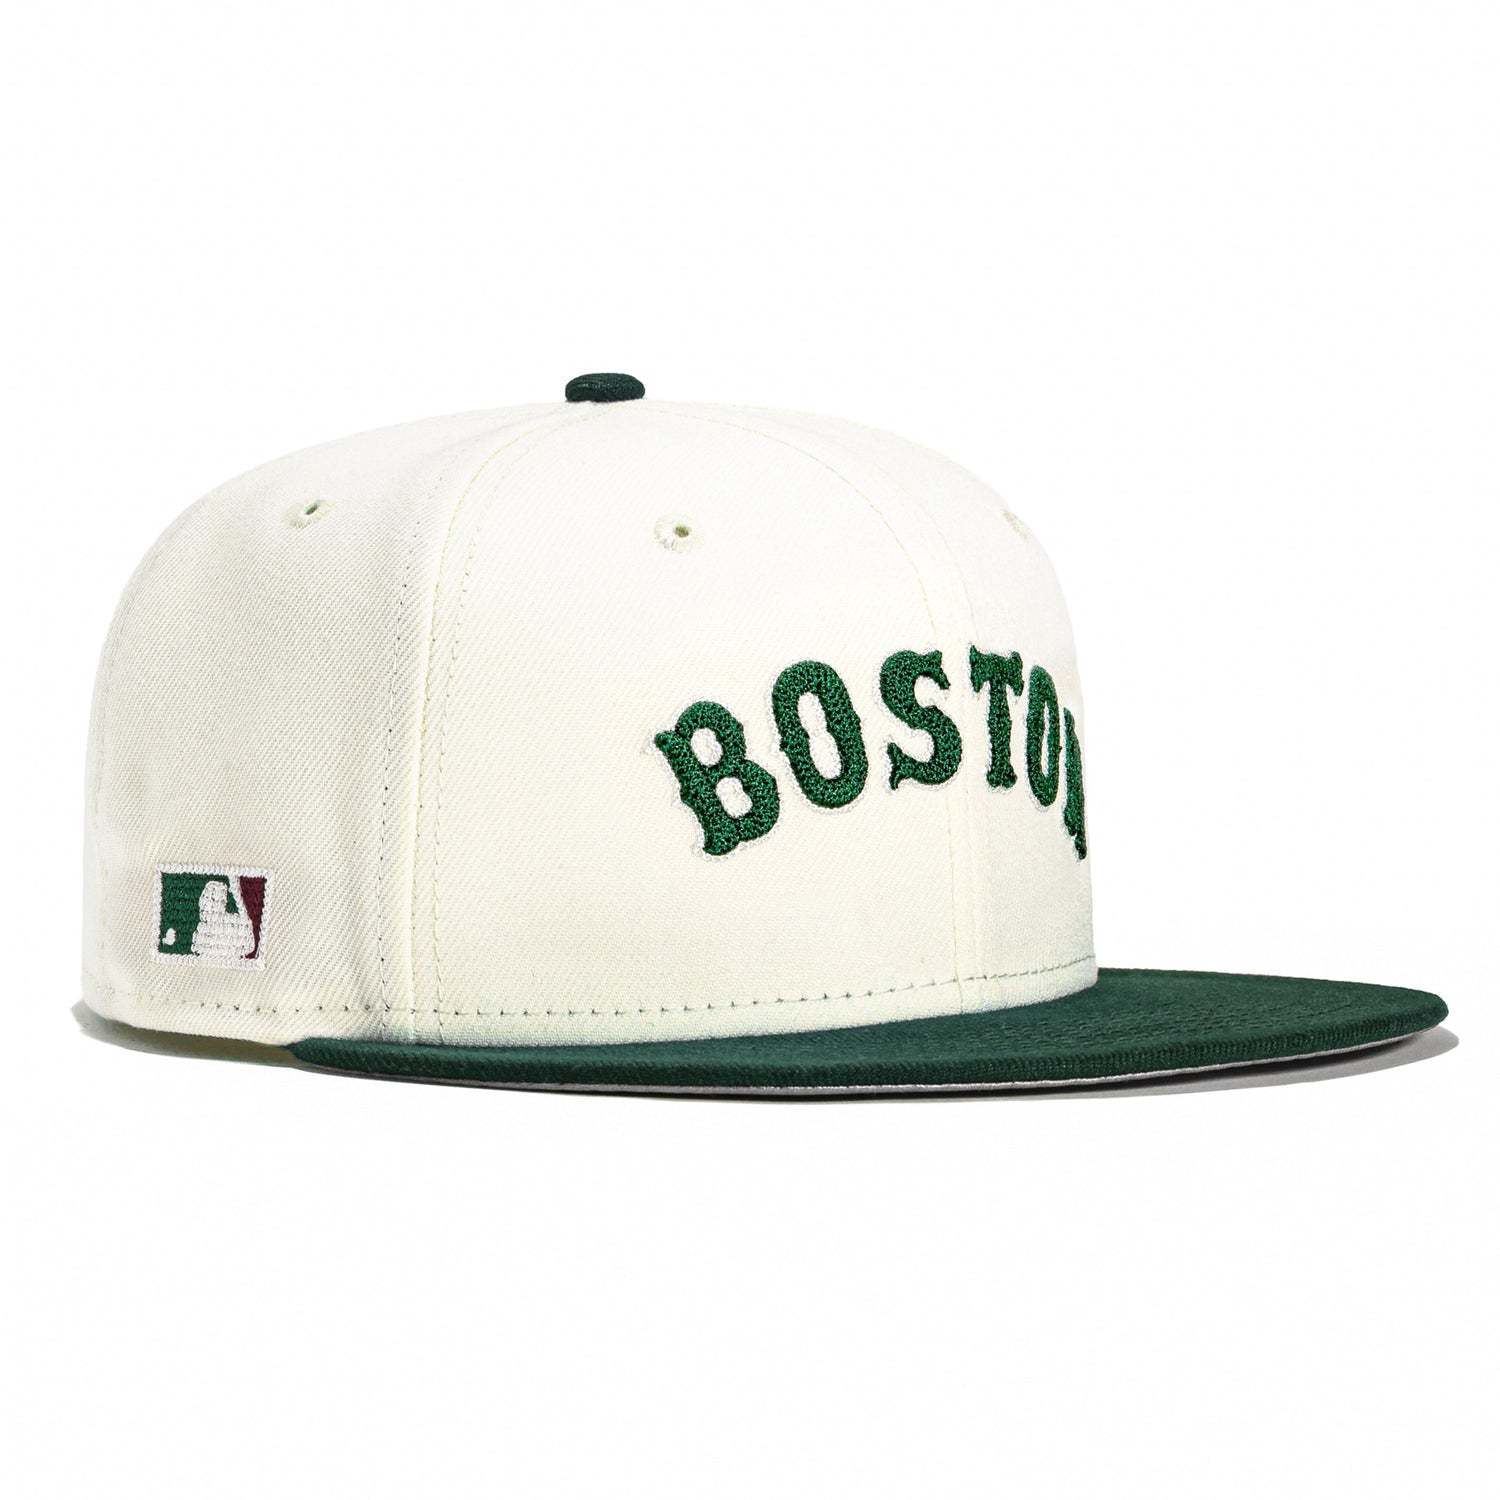 Boston Red Sox City Connect 59fifty Hat Size 7 1/4 for Sale in